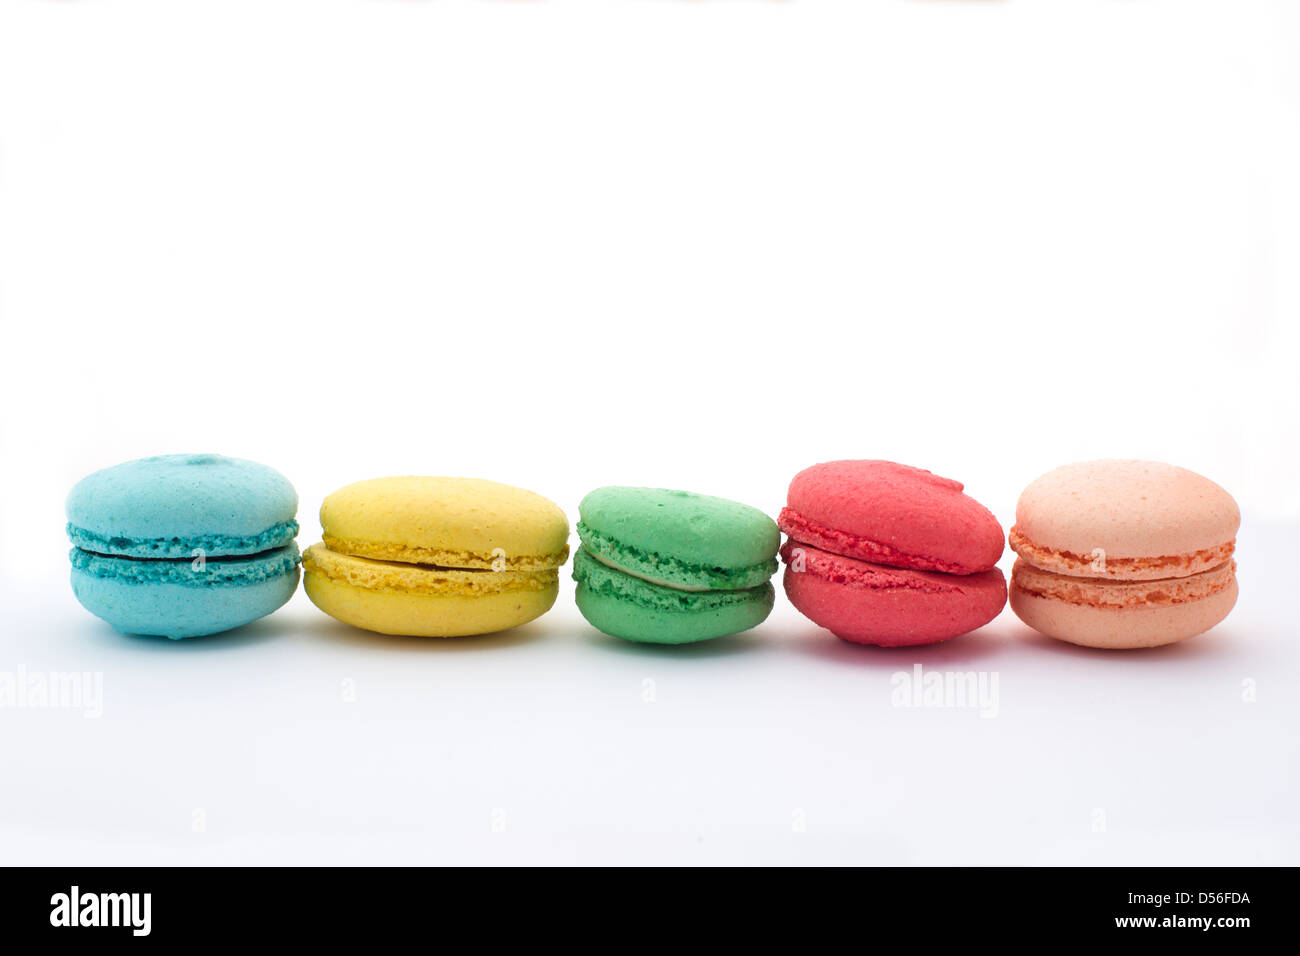 French Macaron cookies in blue, yellow, green, pink and peach on white background. Stock Photo